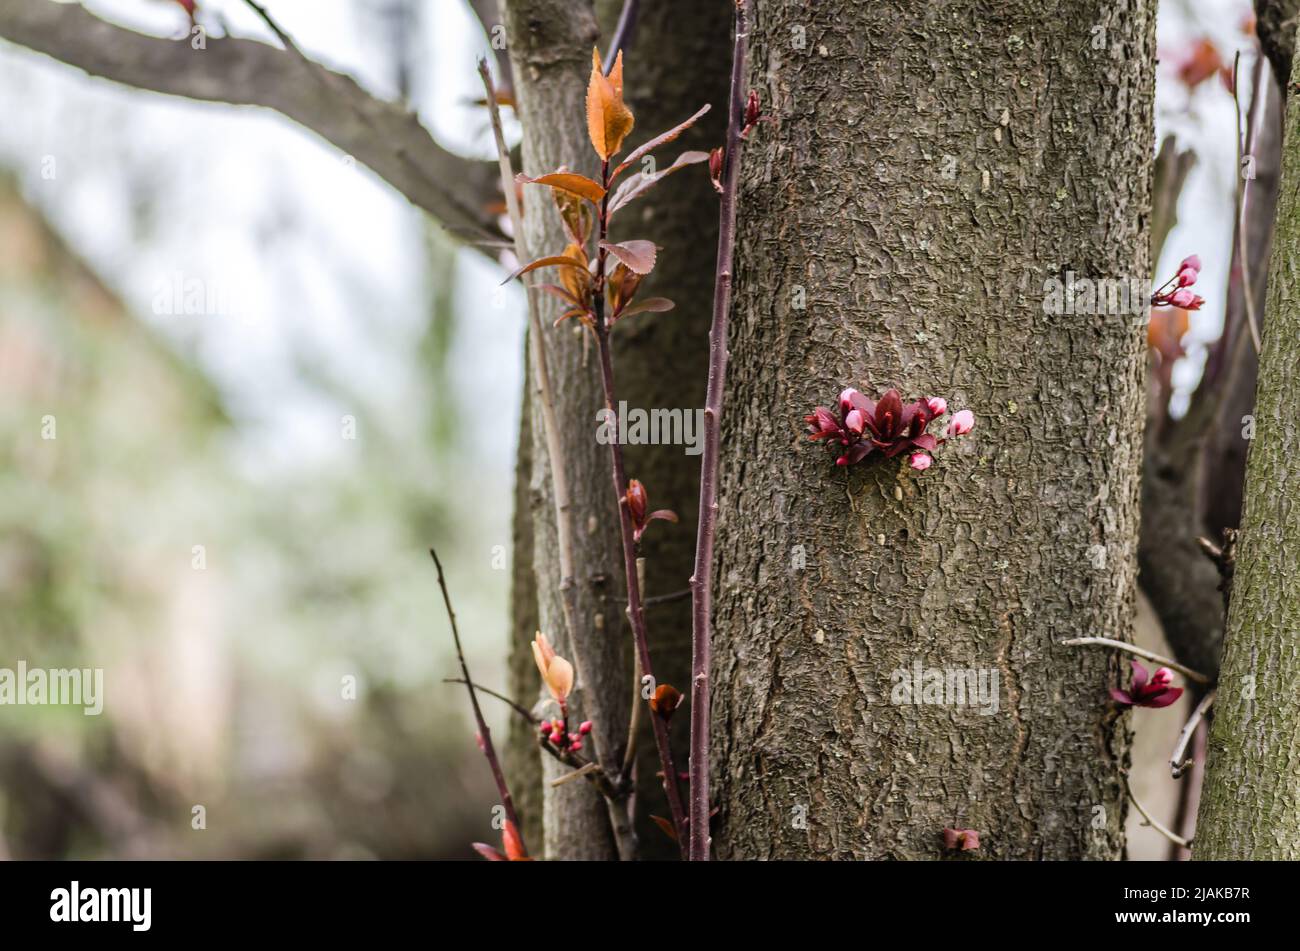 Young branch with blooming purple flowers and buds of red wild plum sunlit by the spring sun. Stock Photo